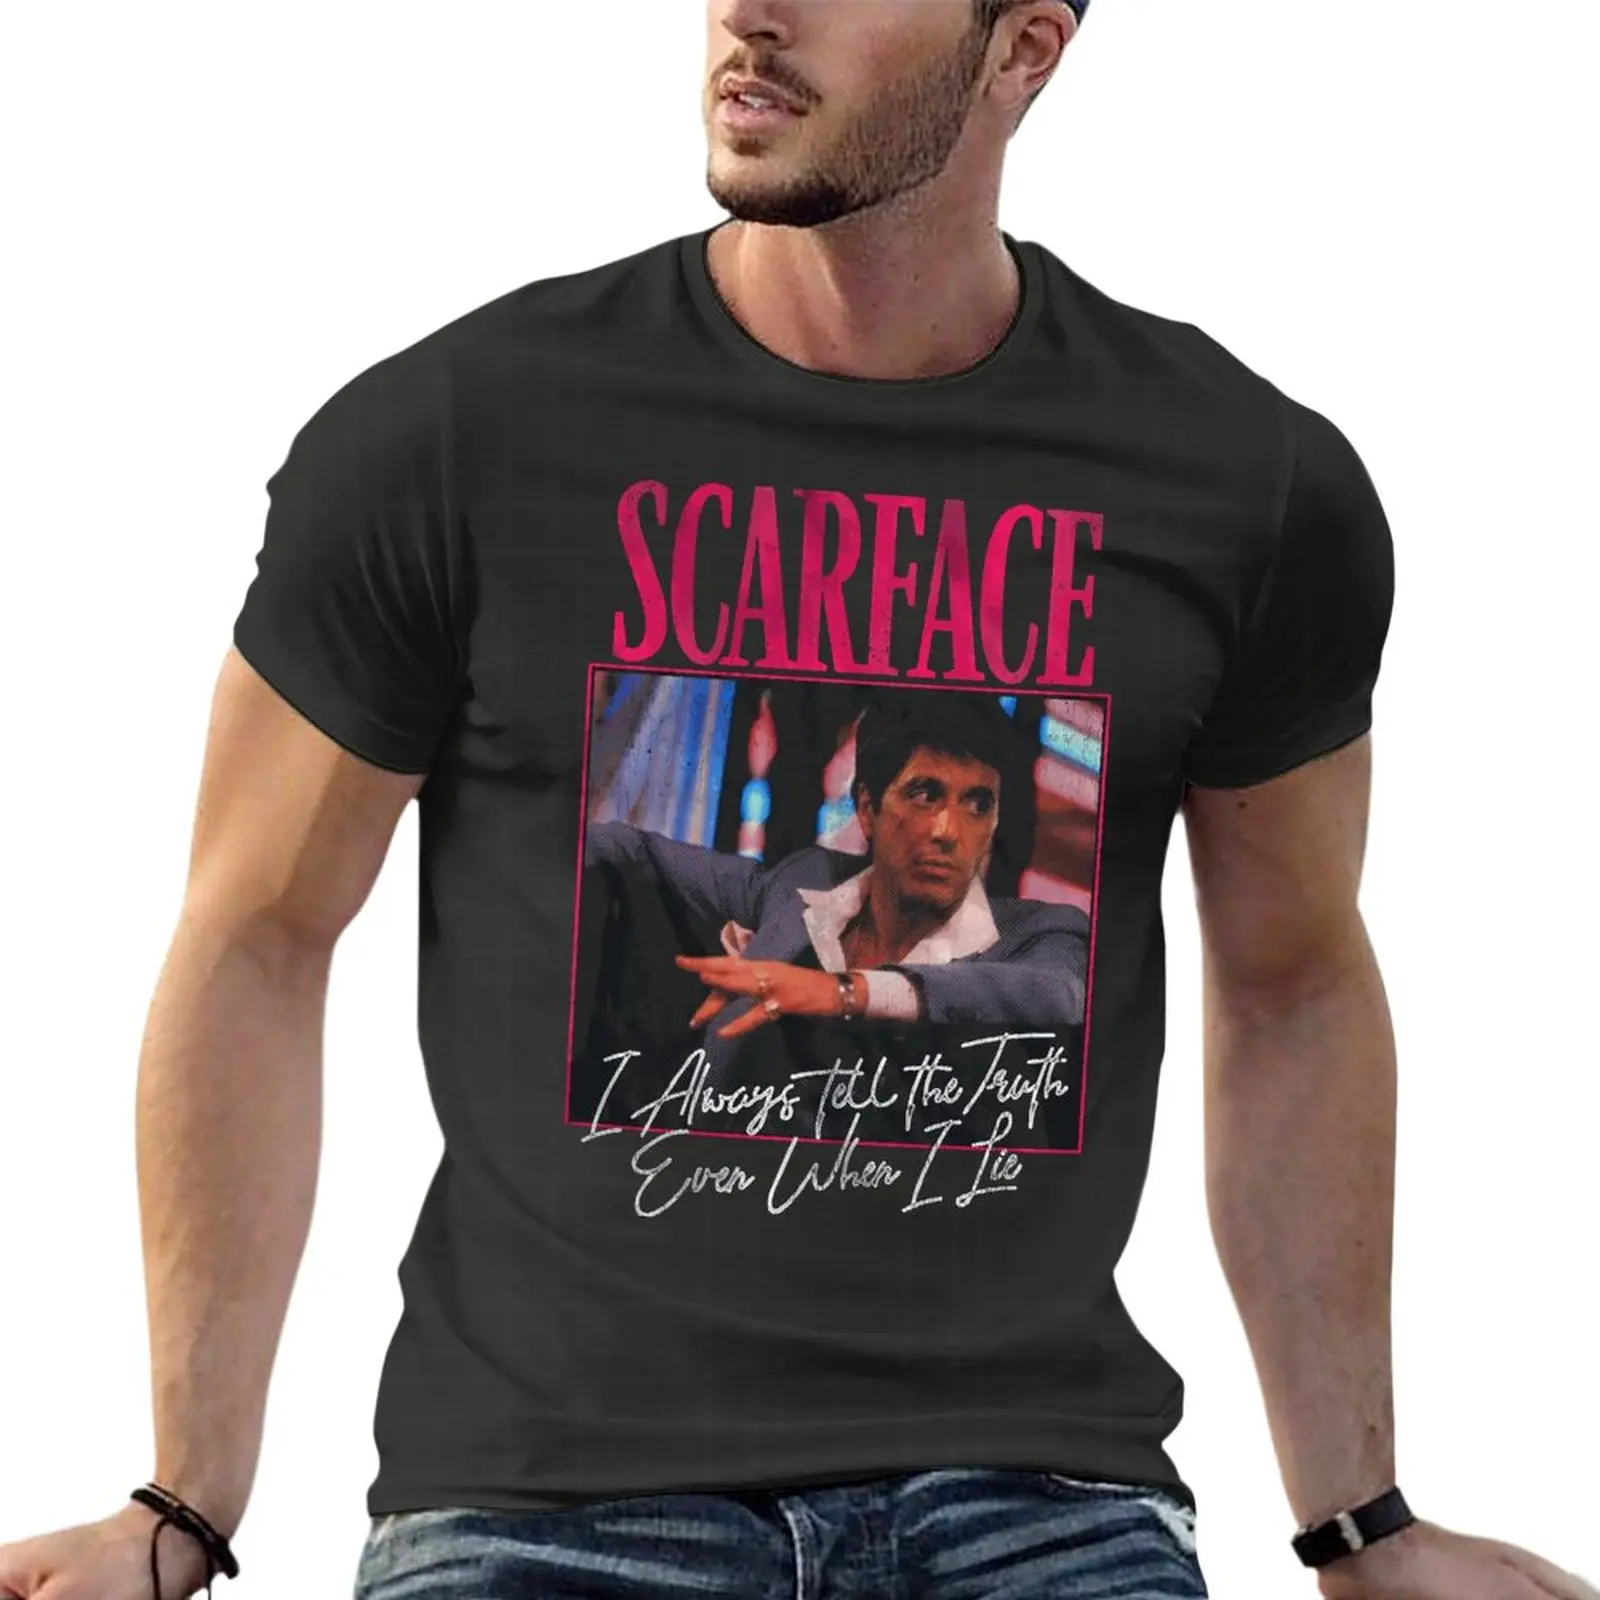 

Scarface Always Tell The Truth - Even When I Lie Tony Montana Quote Oversized T-Shirt Fashion Mens Clothes Short Sleeve Streetwe